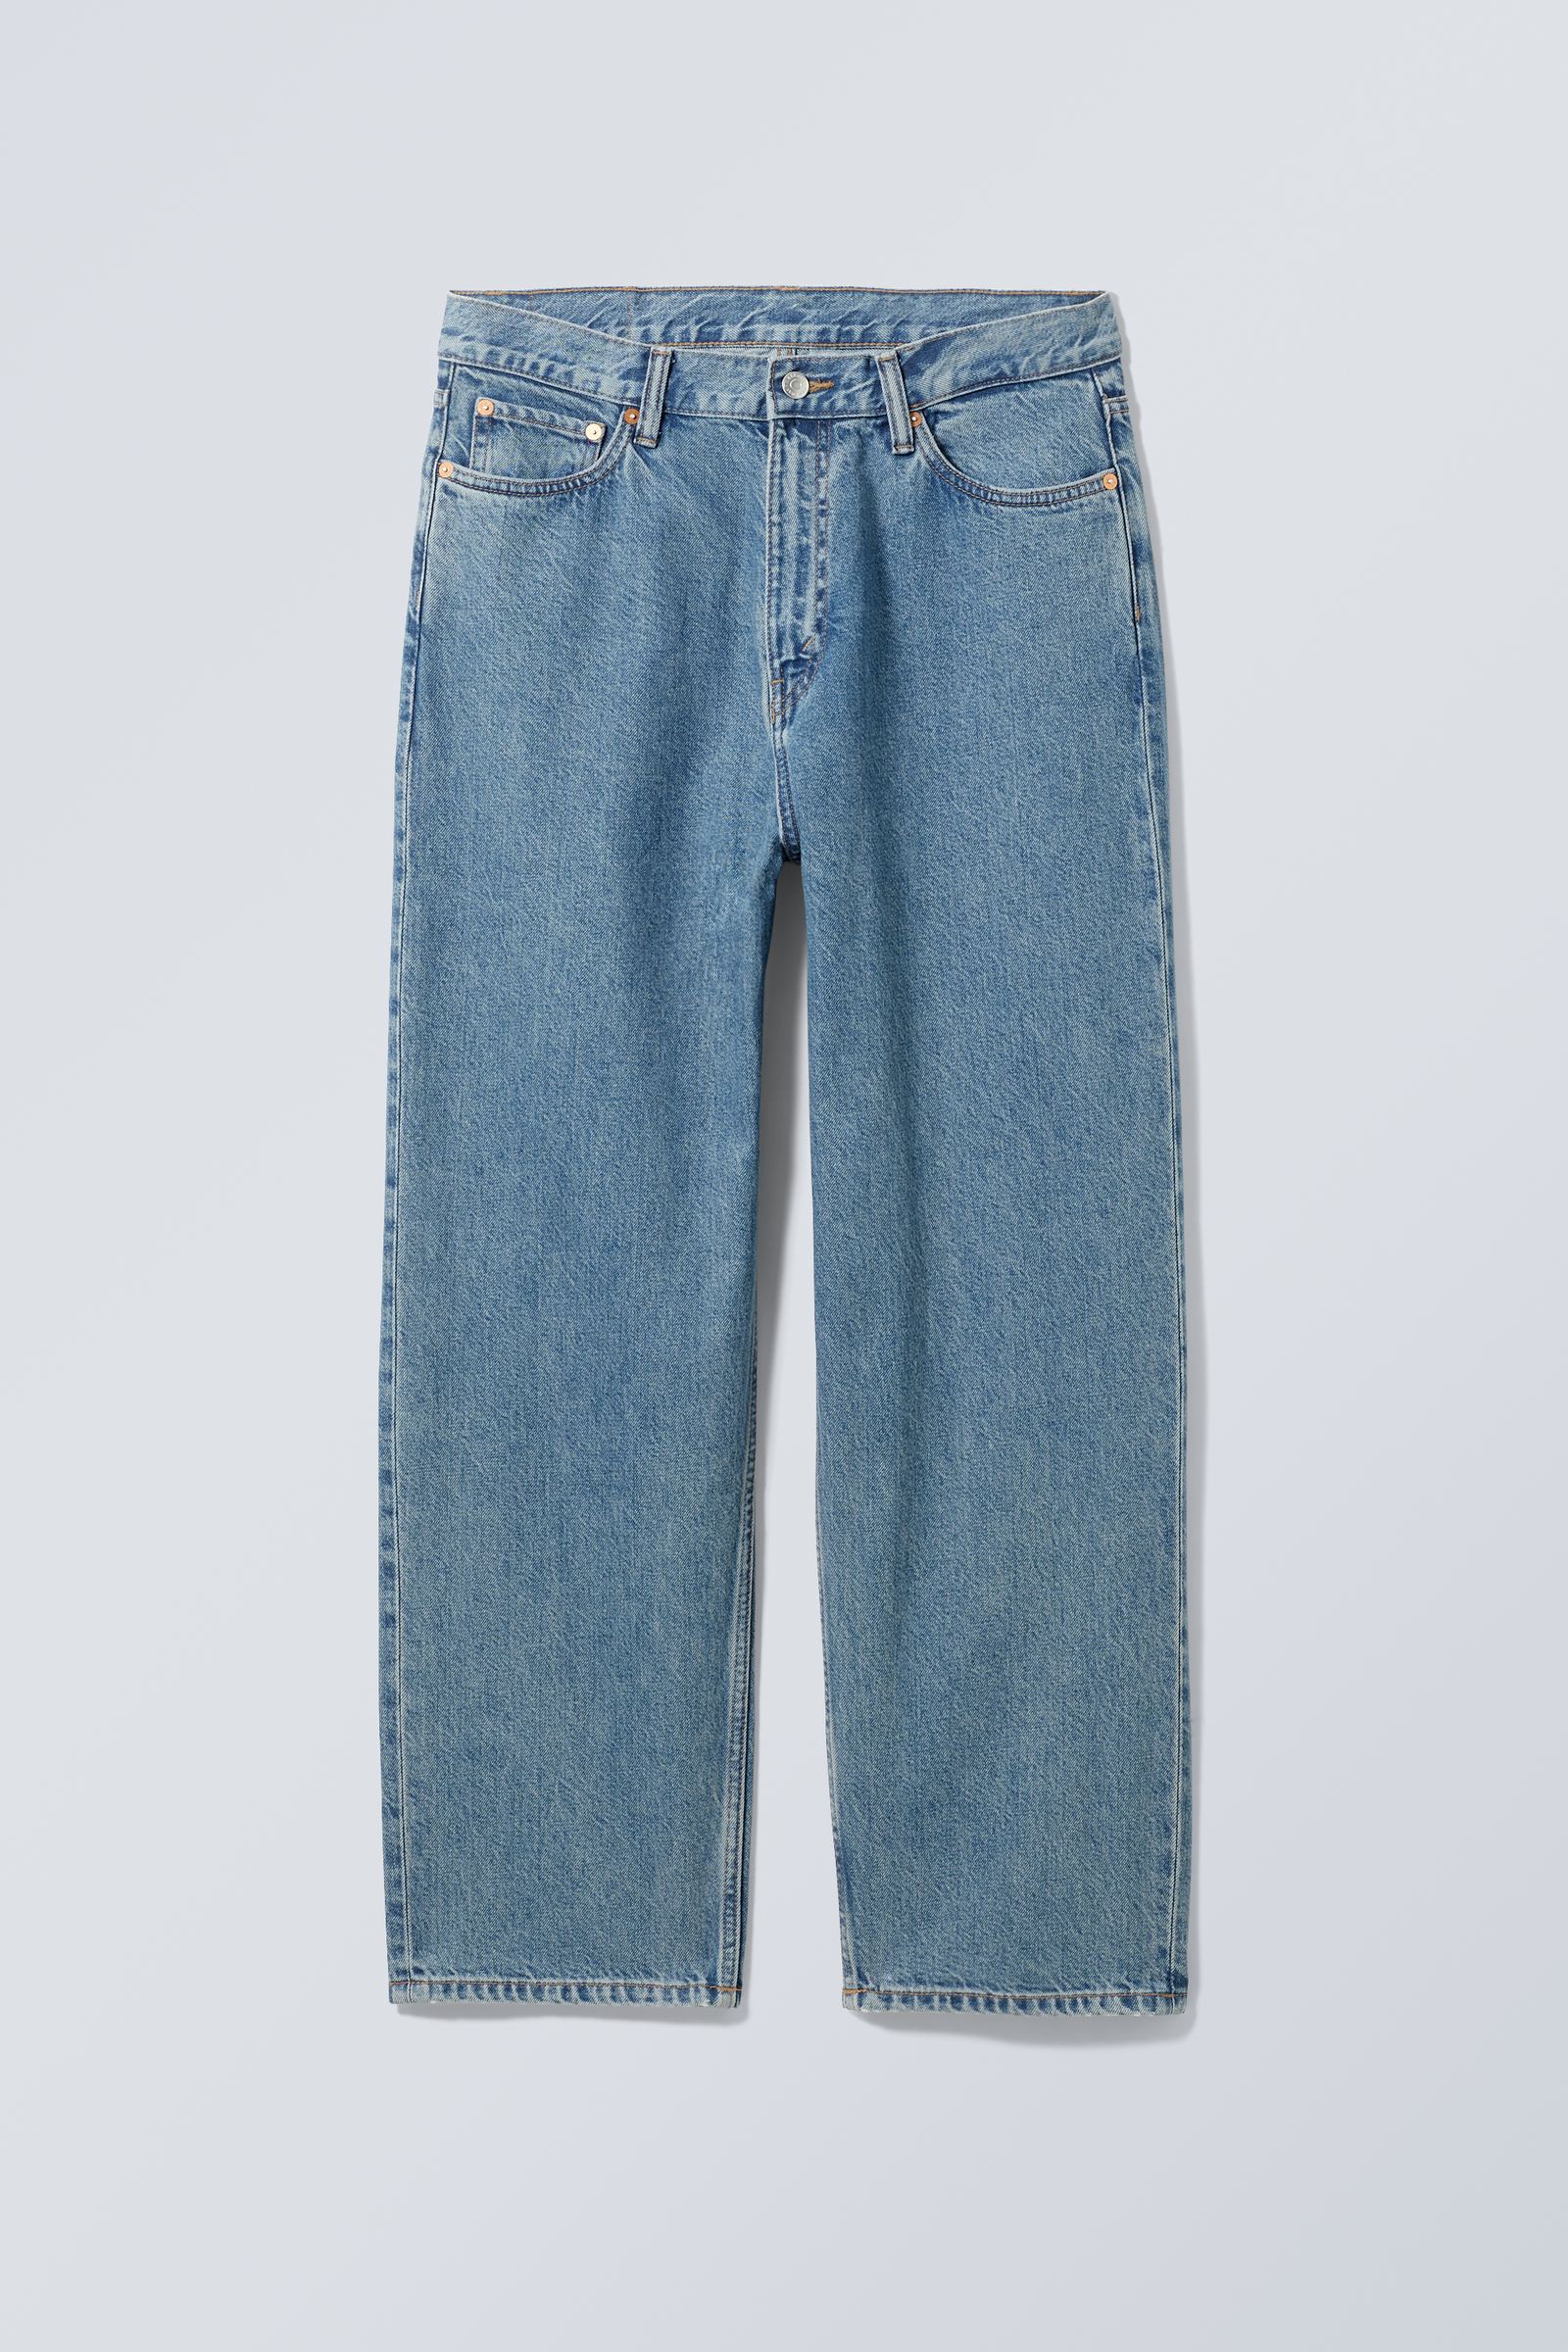 90s blue - Galaxy Loose Straight Jeans - 5